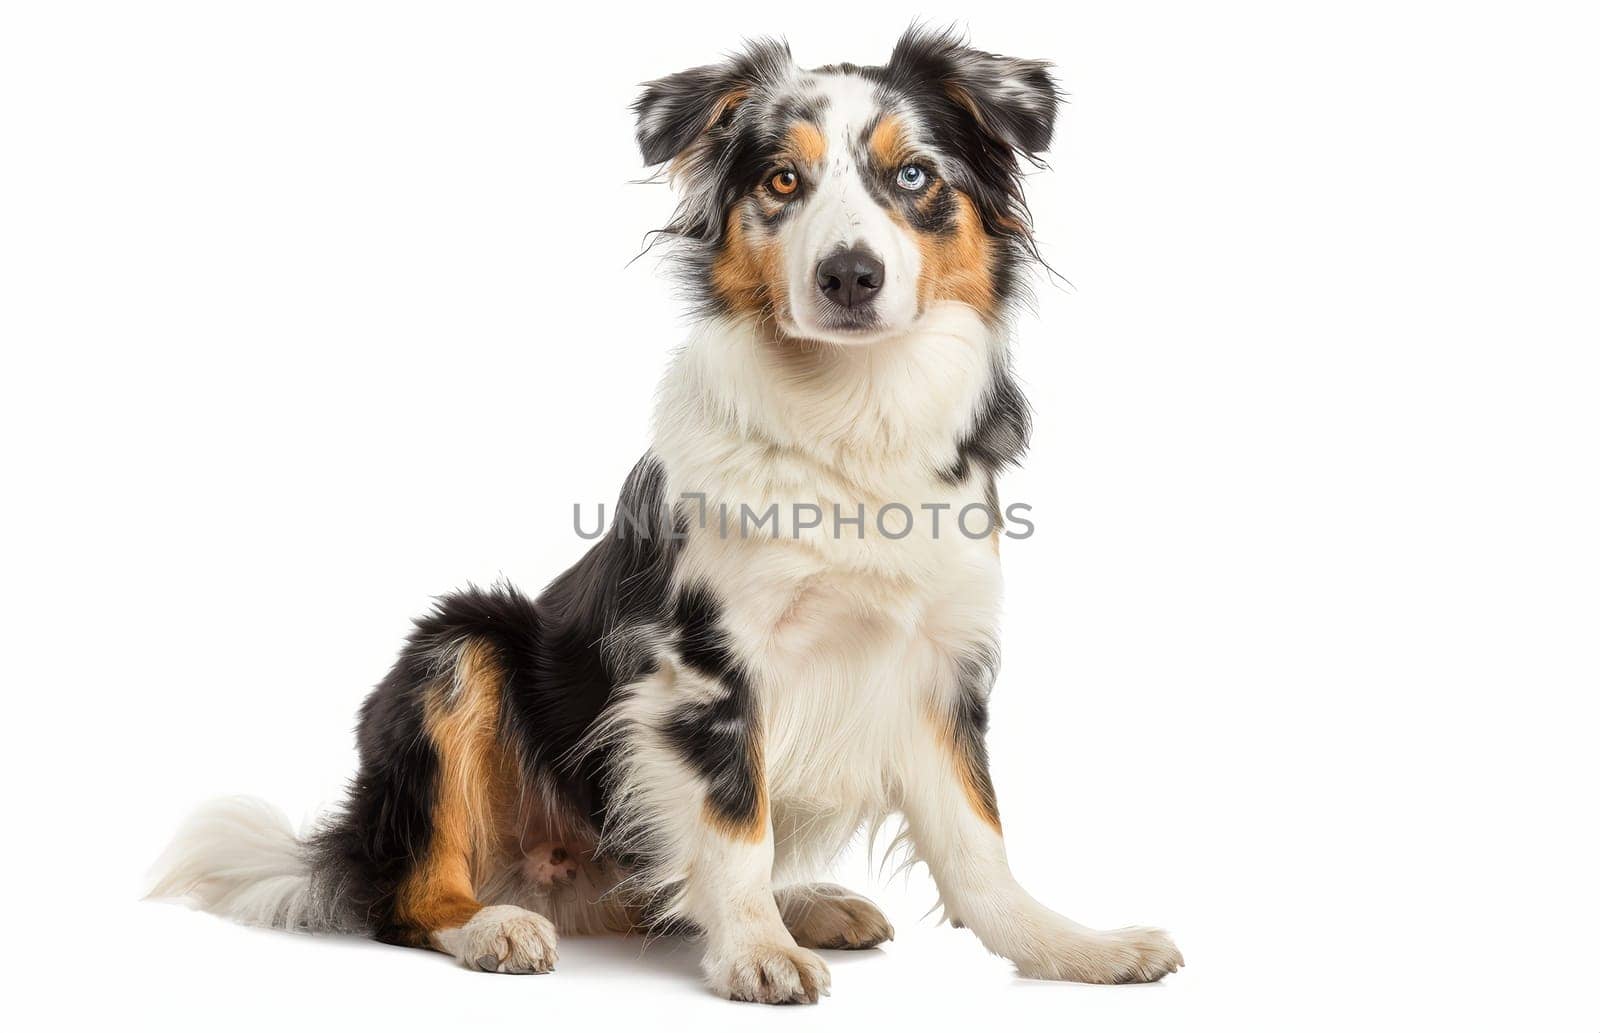 An attentive Australian Shepherd sits up, its tri-colored coat beautifully groomed. The dog's focused expression reflects its responsive and trainable nature. by sfinks